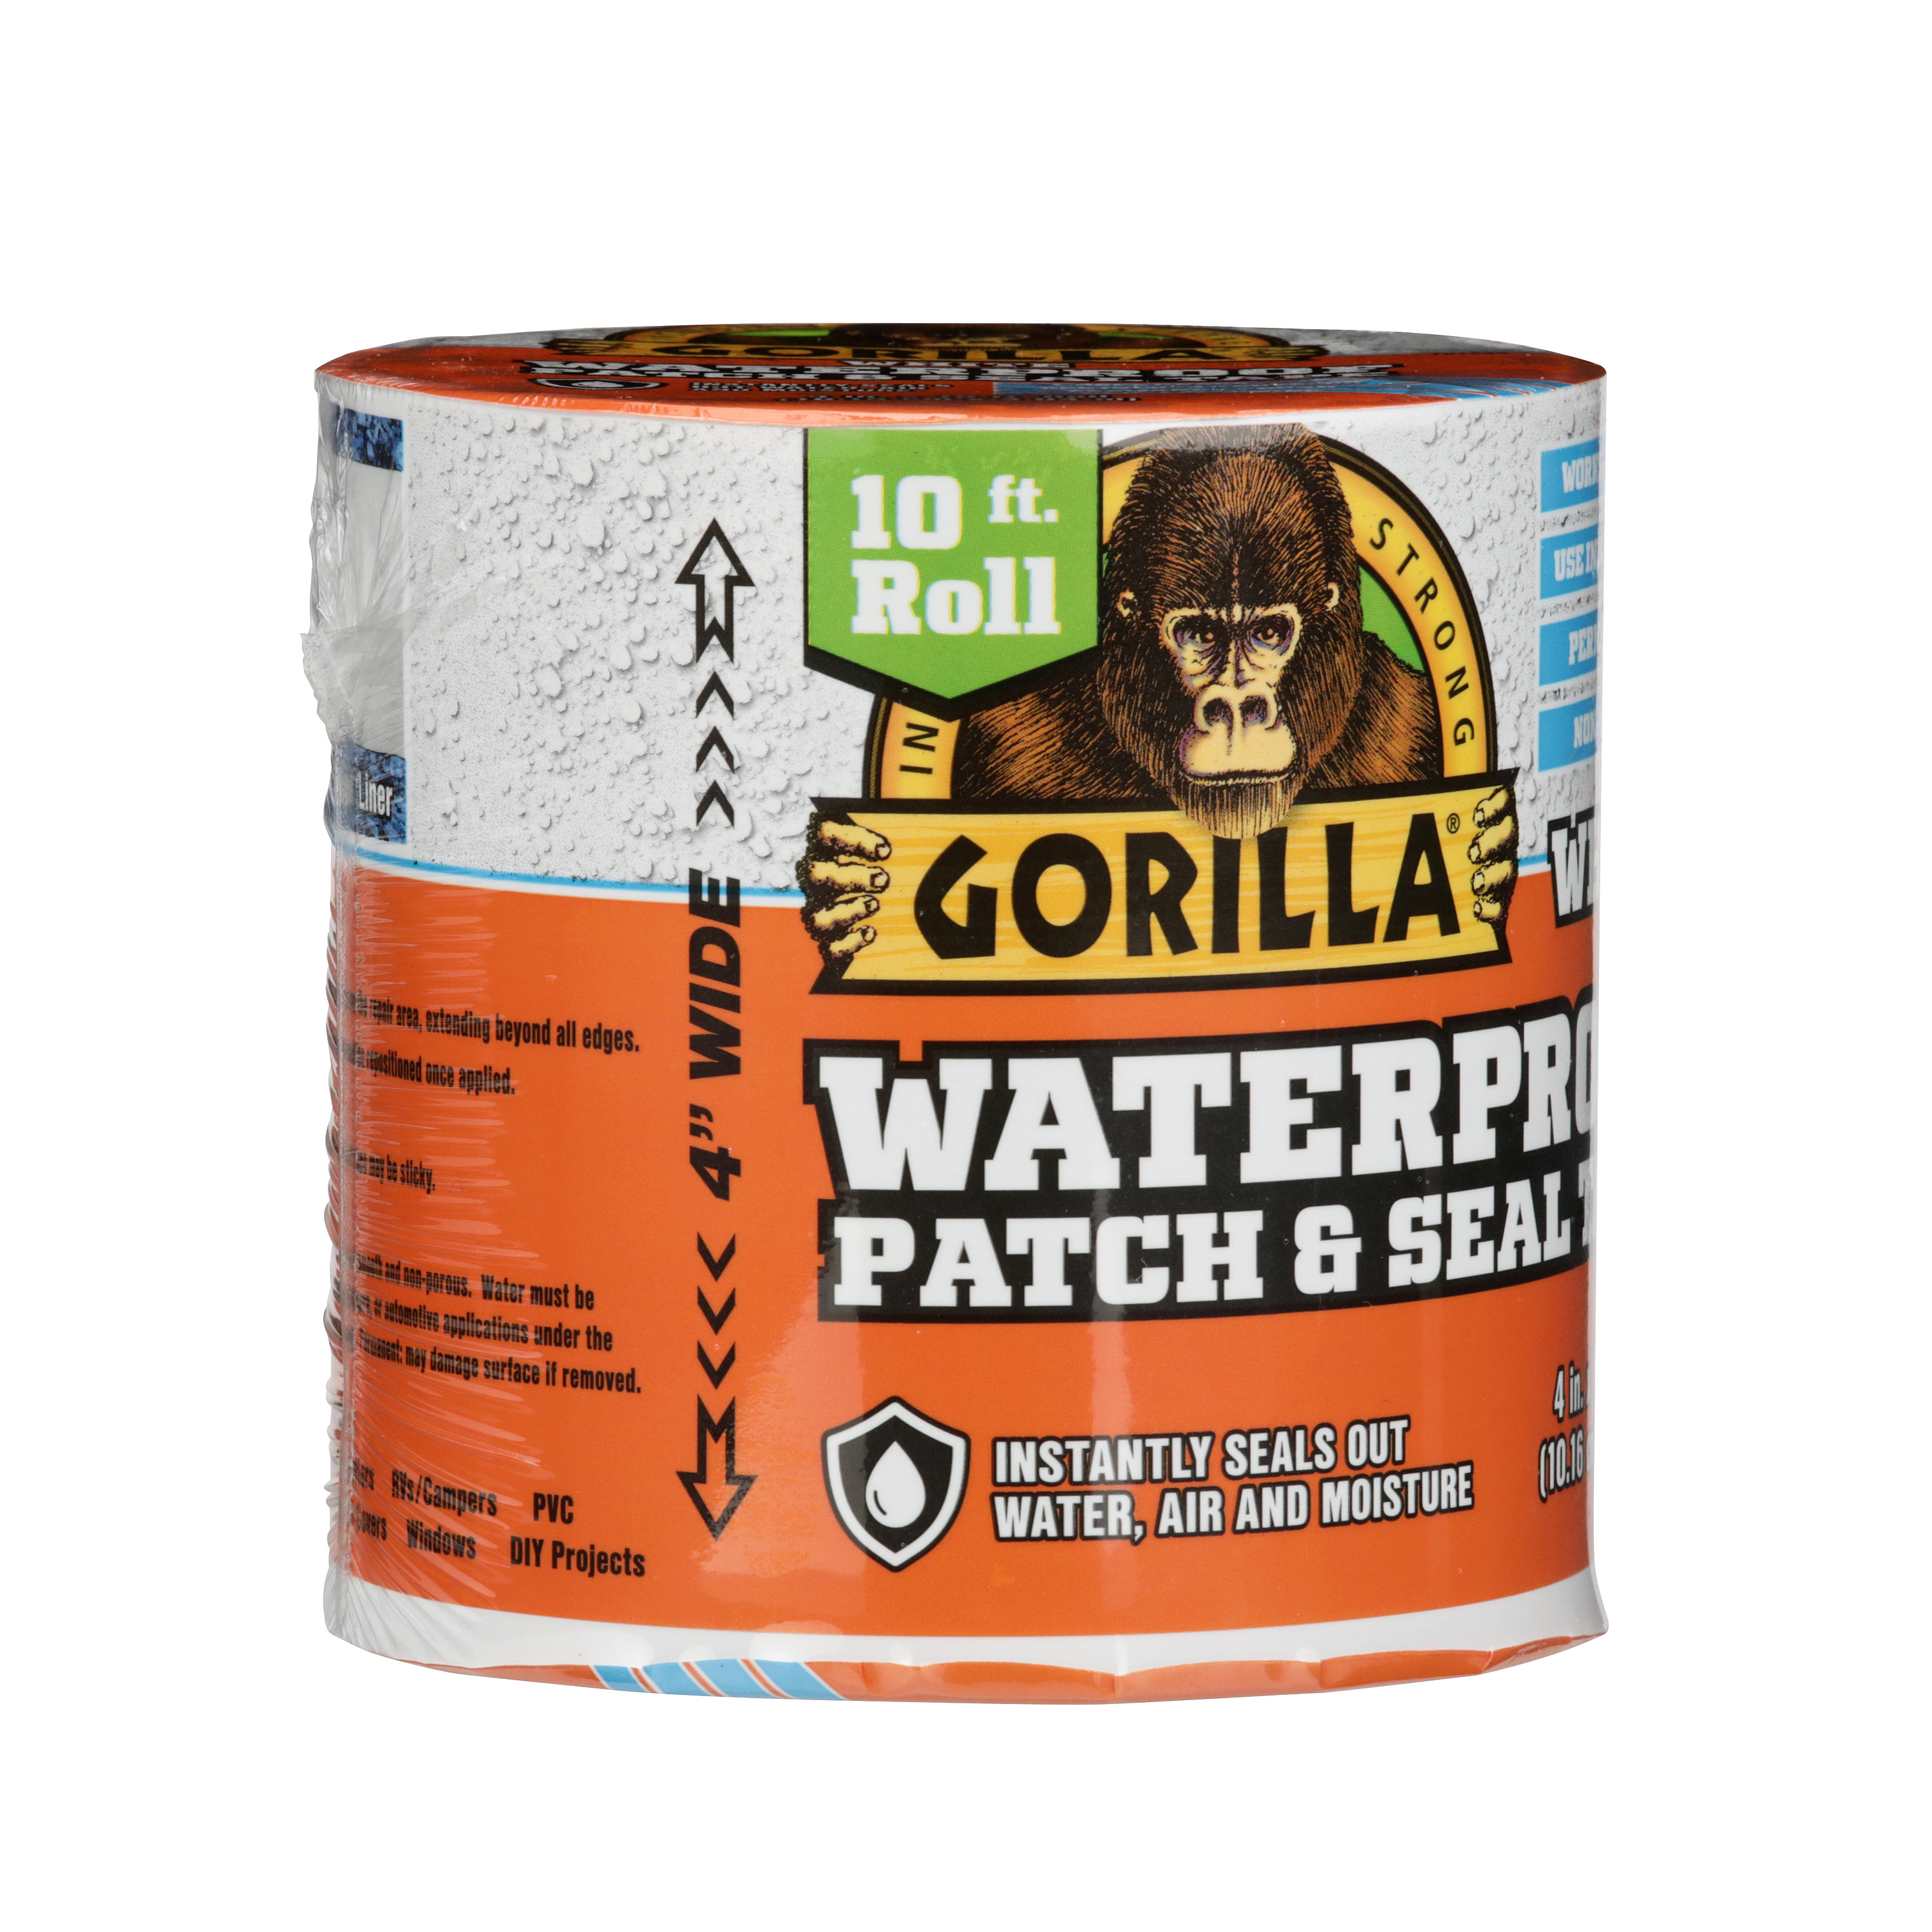 Gorilla Glue White Waterproof Patch and Seal Repair and Sealant Tape, 10  Foot Roll 